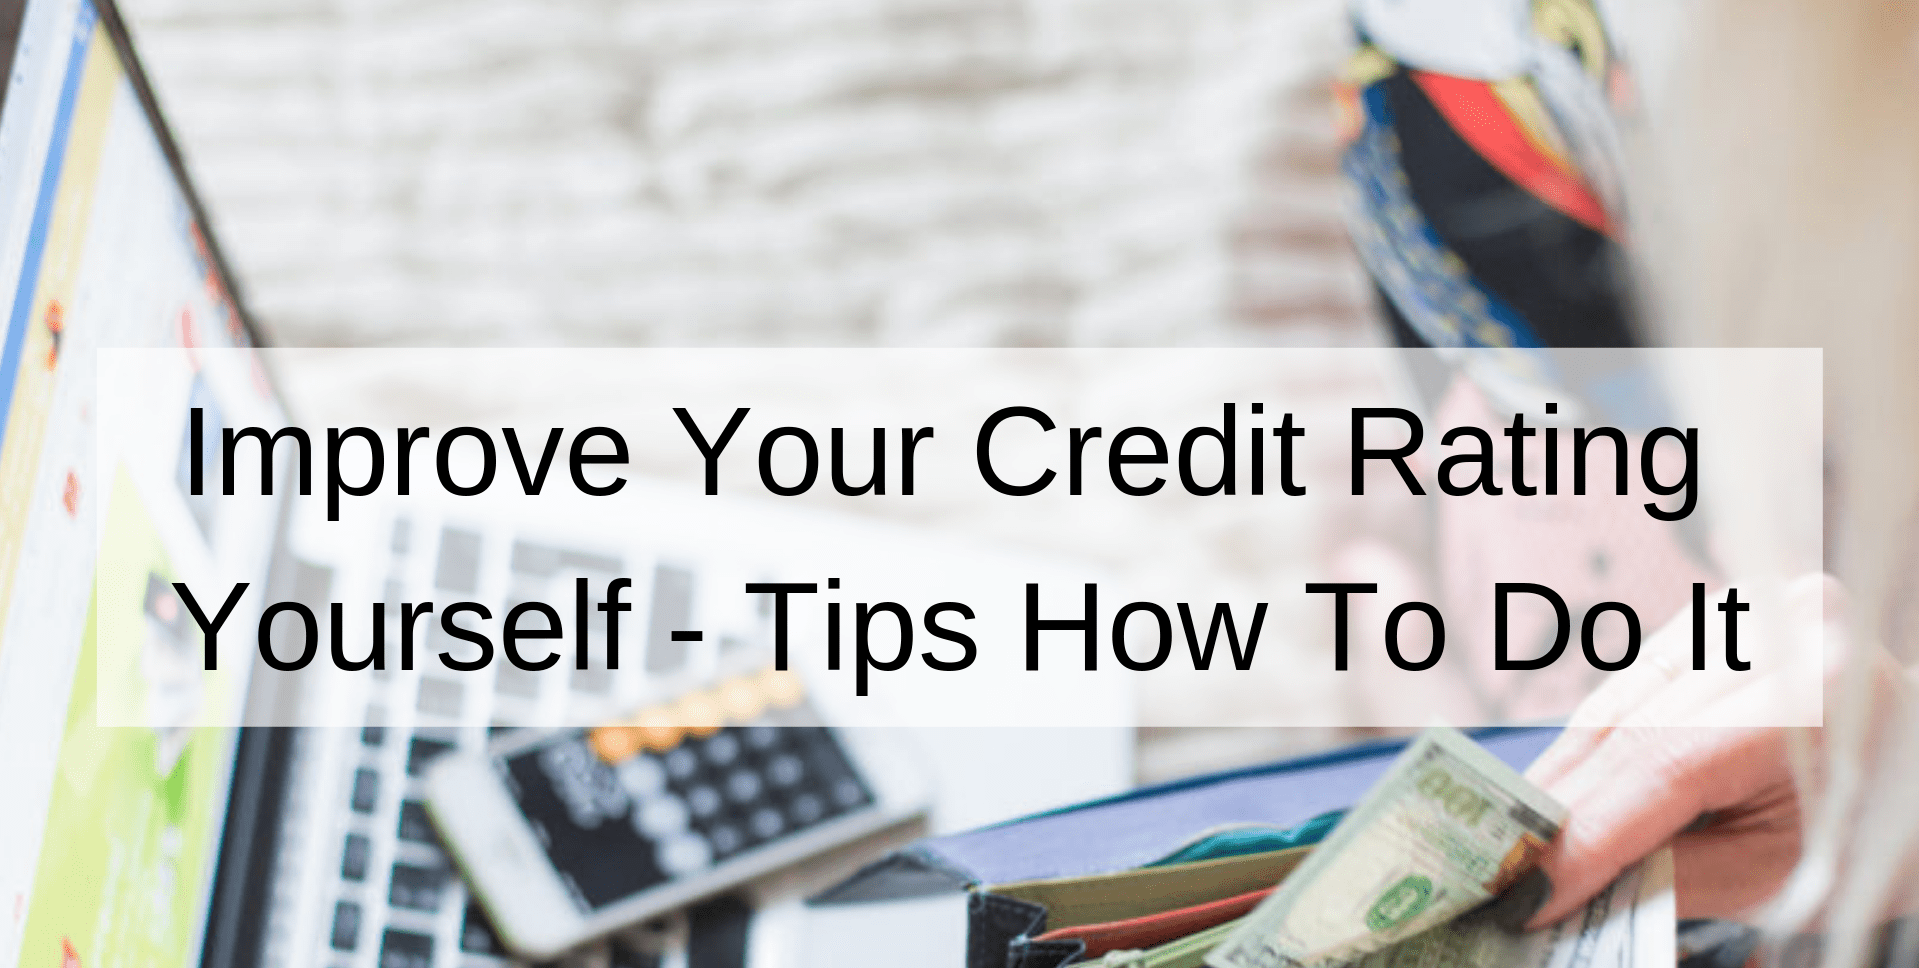 Improve Your Credit Rating Yourself - Tips How To Do It